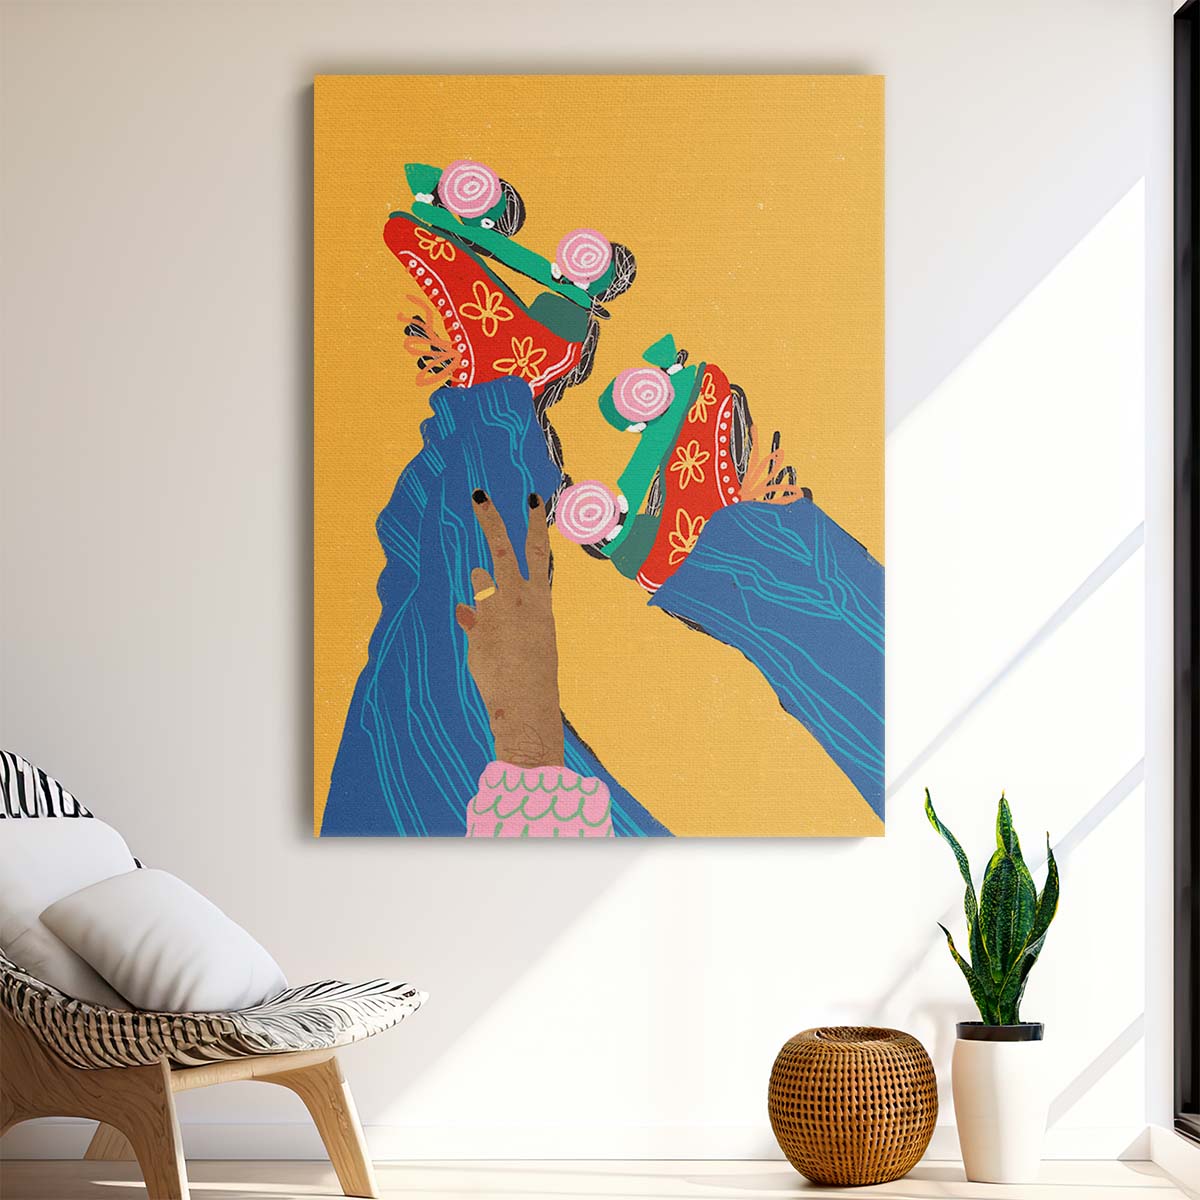 Vibrant Abstract Roller Skating Woman Illustration by Gigi Rosado by Luxuriance Designs, made in USA